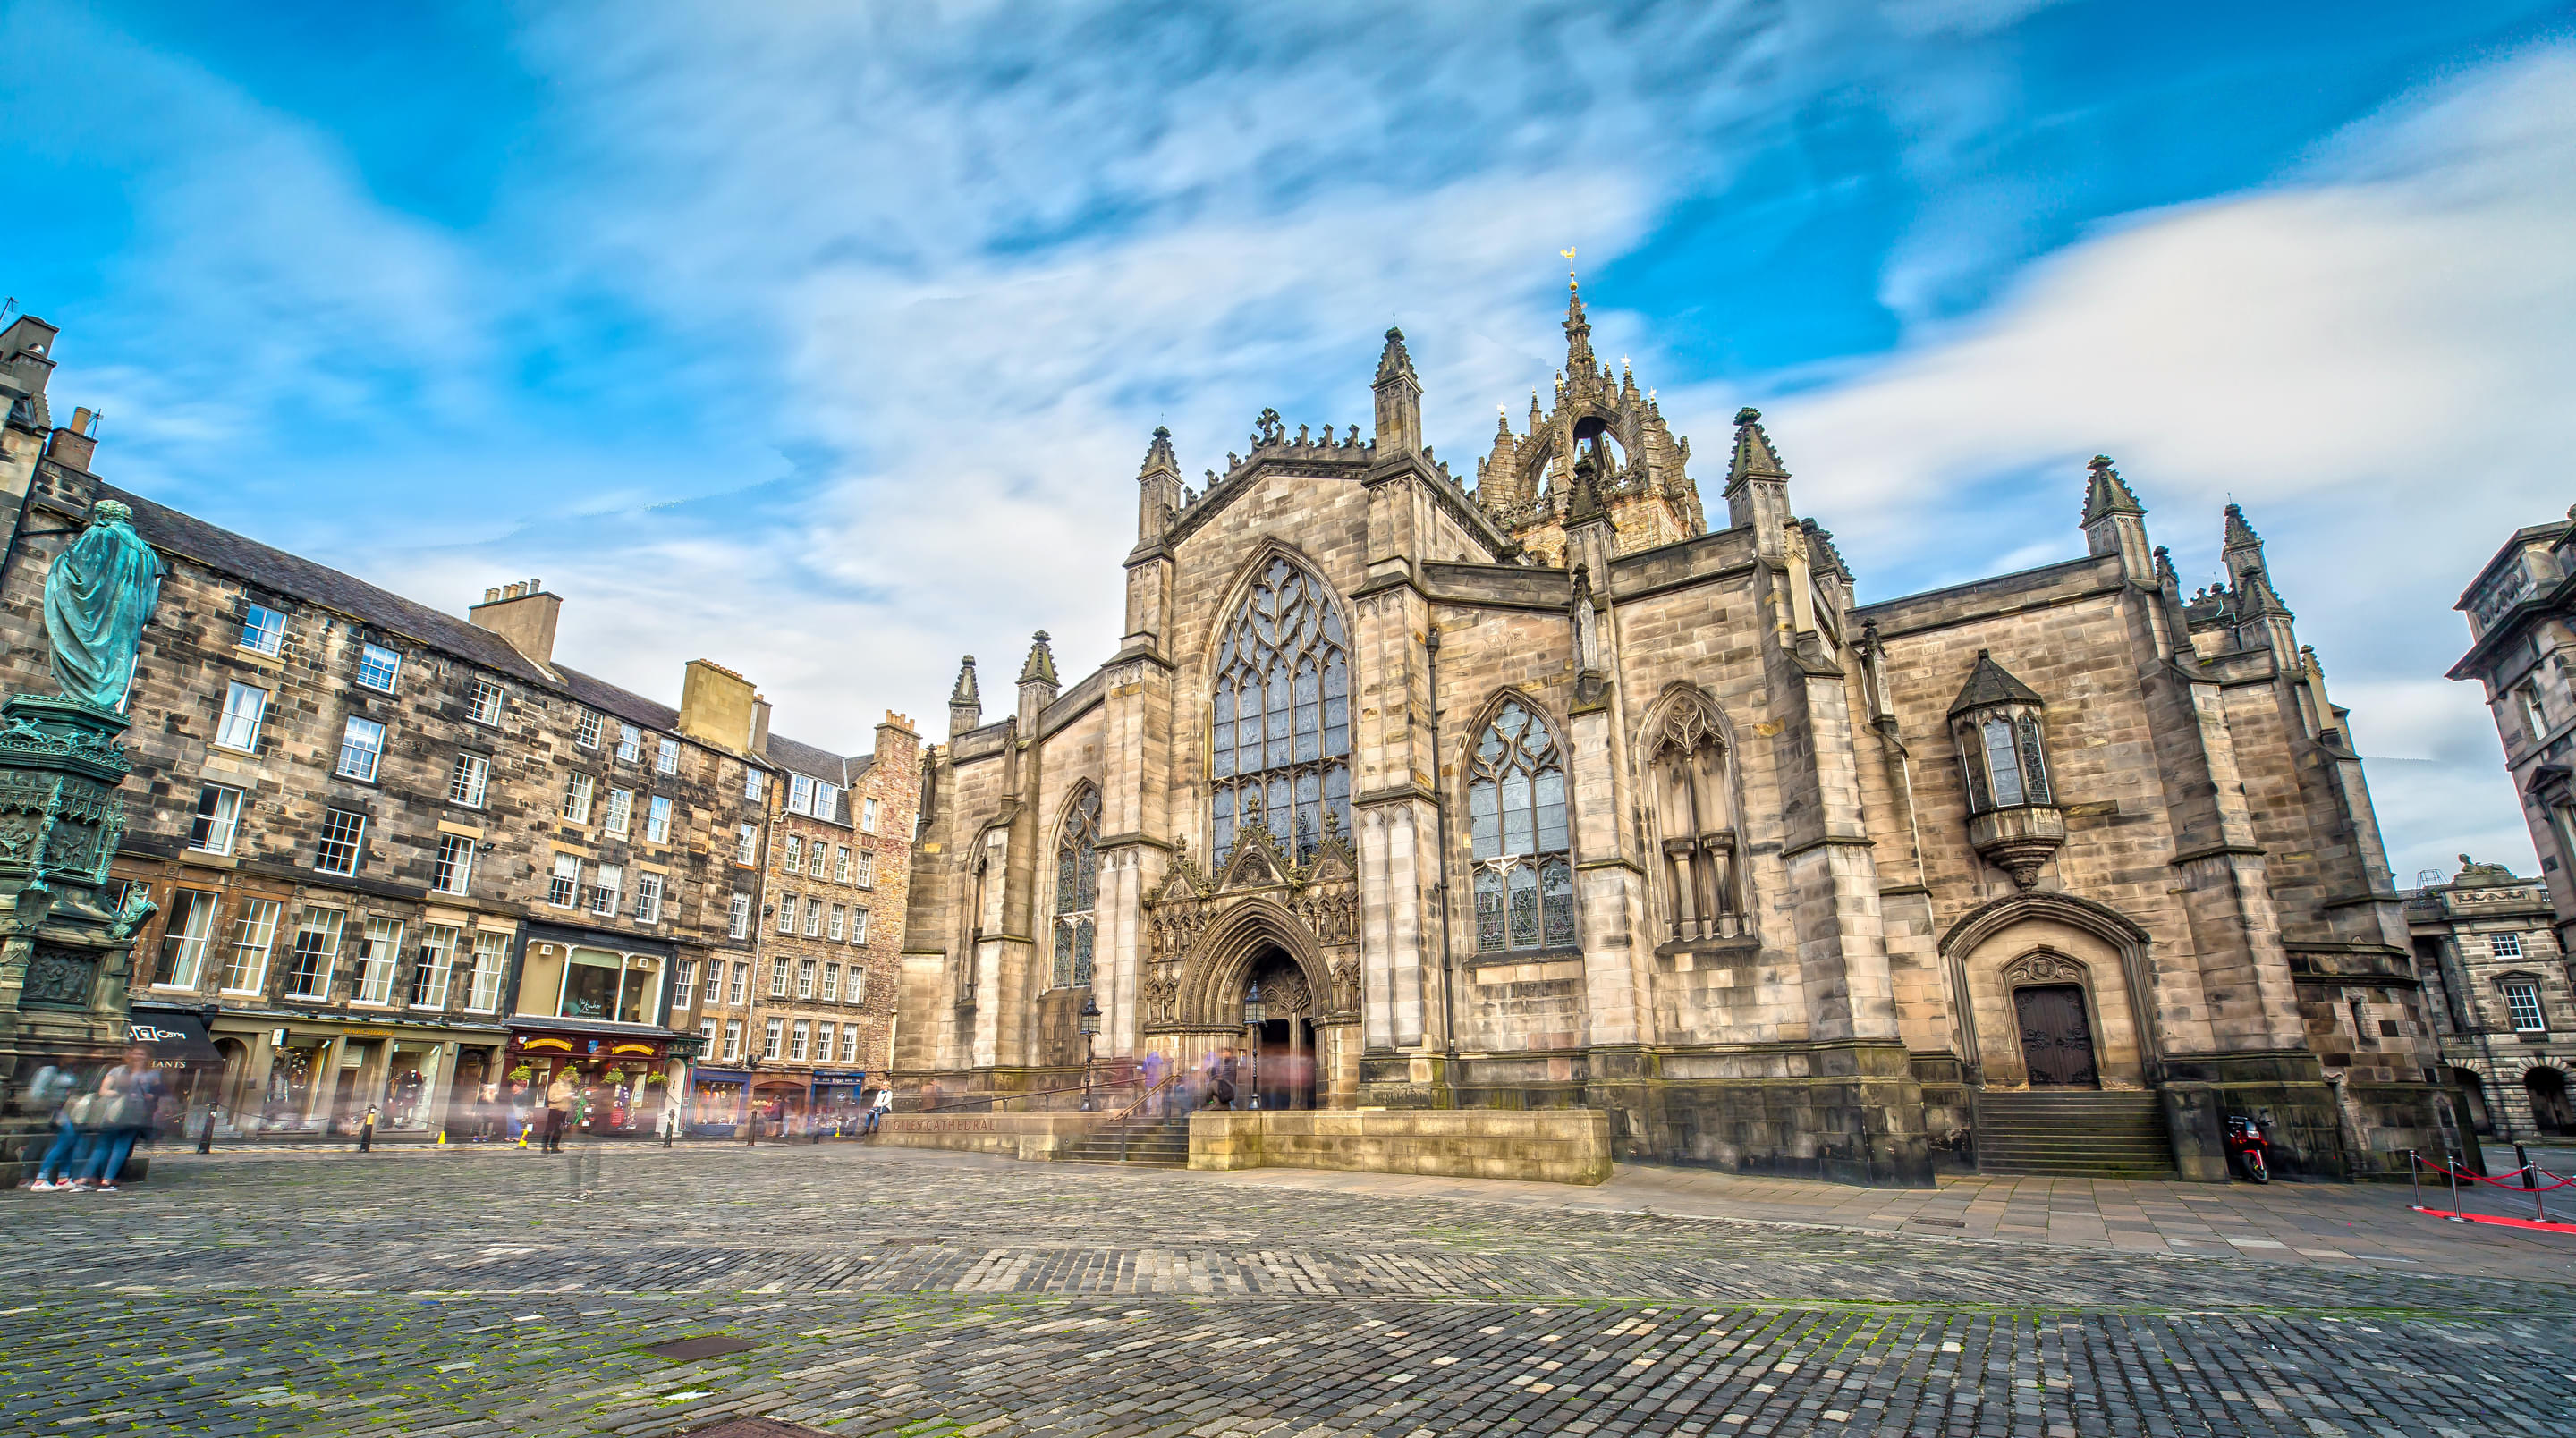 St. Giles Cathedral Overview